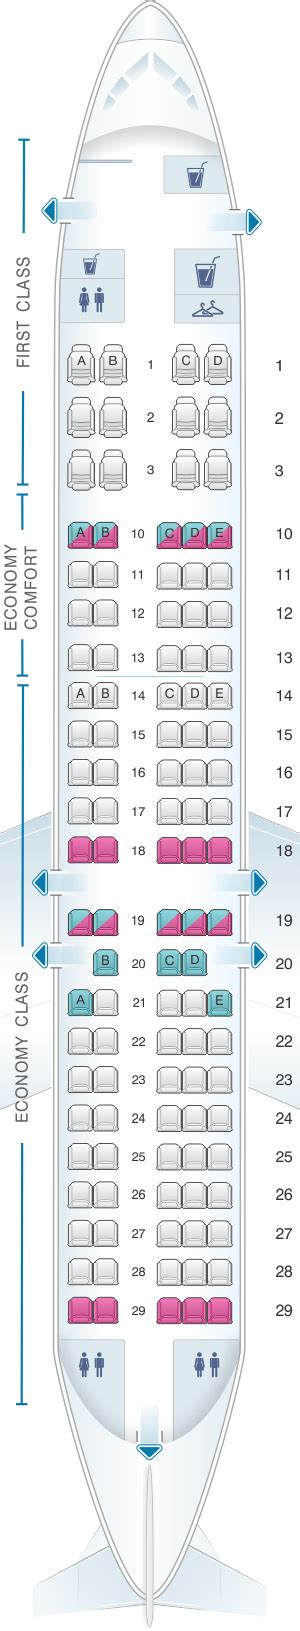 Delta seats map. Please enter the date, origin, destination, and flight number of a Delta Air Lines flight. Press View Seat Data , and you can see the flight's availability of seat assignments. Data is … 